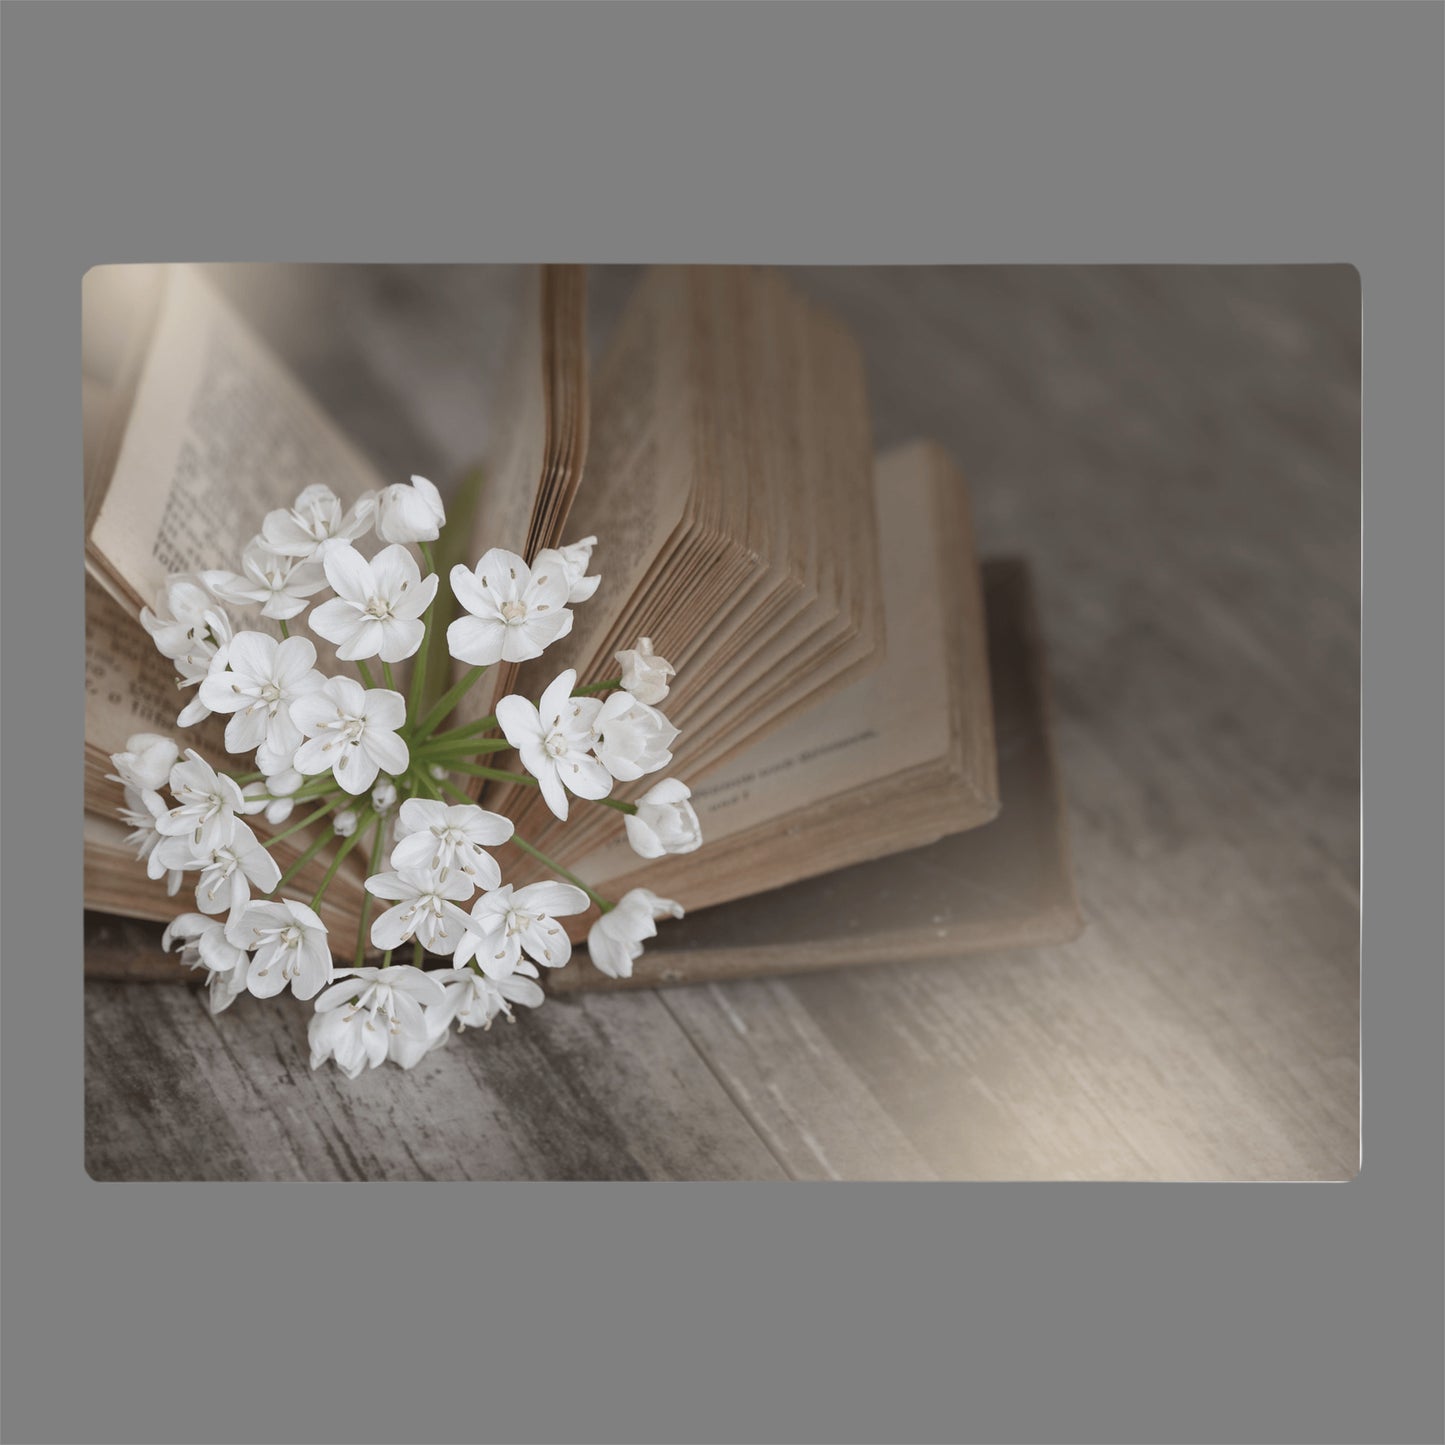 Vintage book with flowers printed on glass cutting board for gift